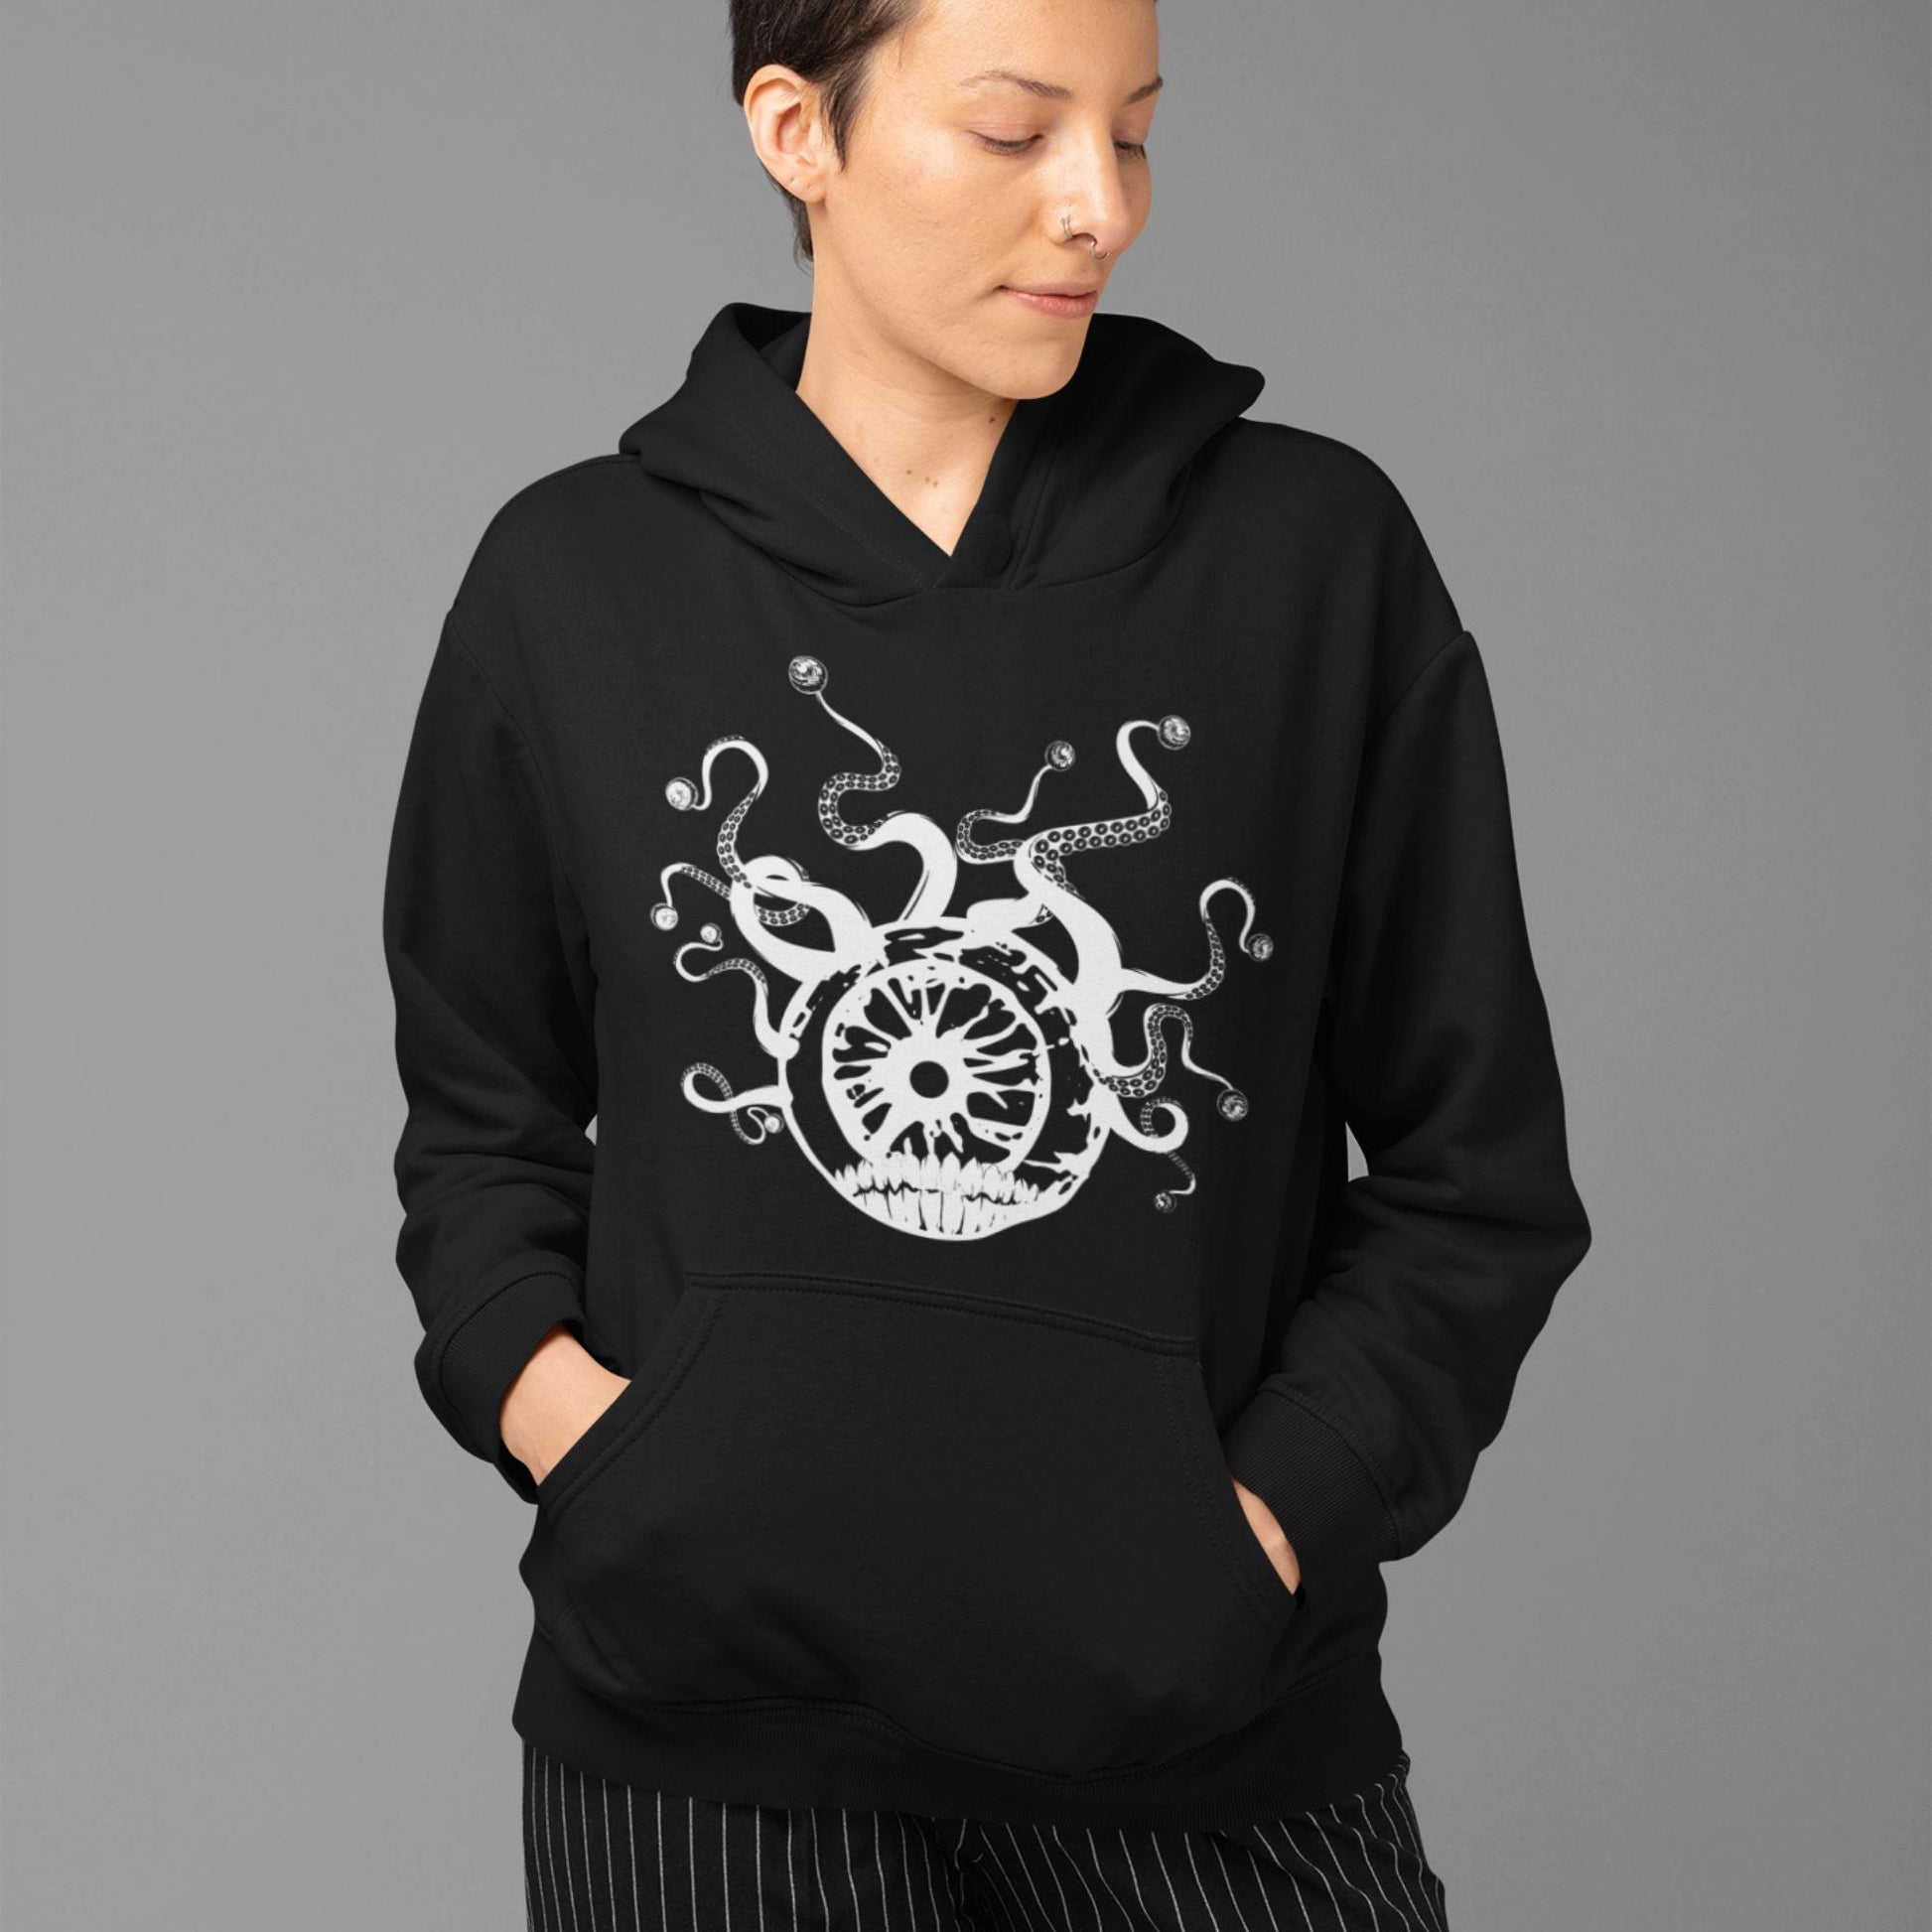 The Beholder in White Hoodie (Unisex)